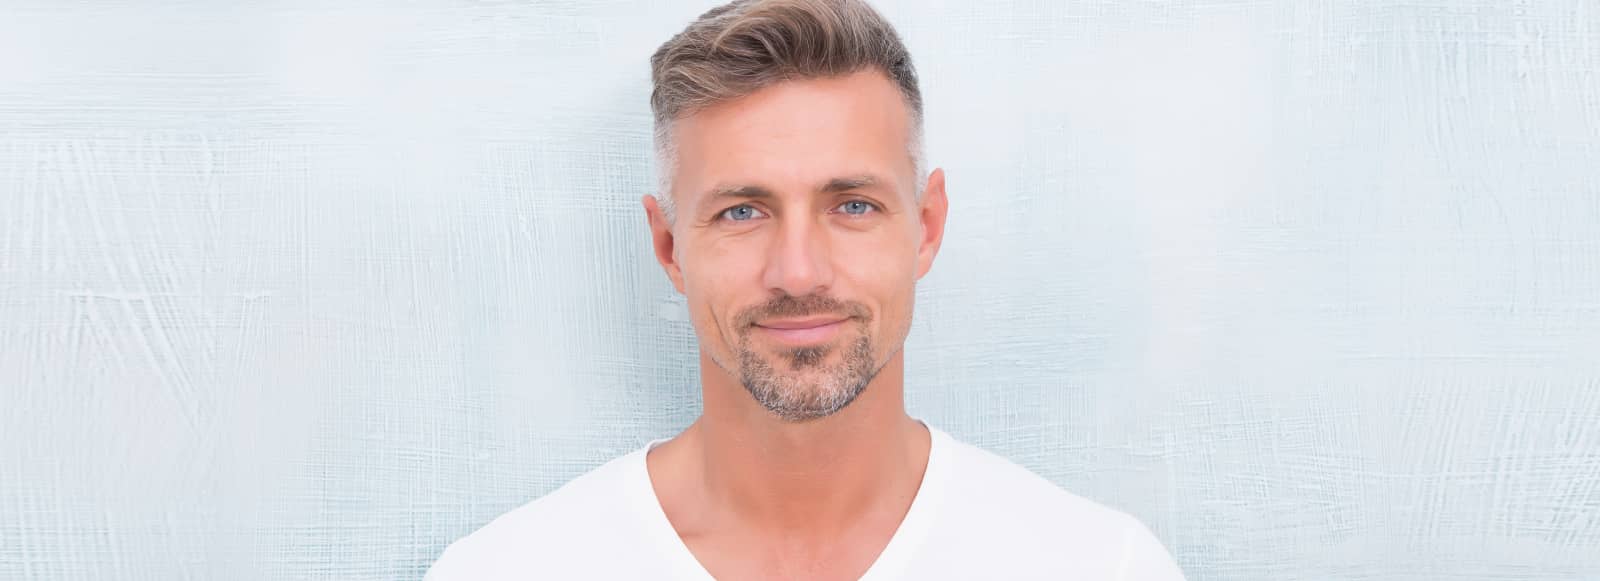 Aesthetic Treatments For Men – 111 Harley St. Clinic.